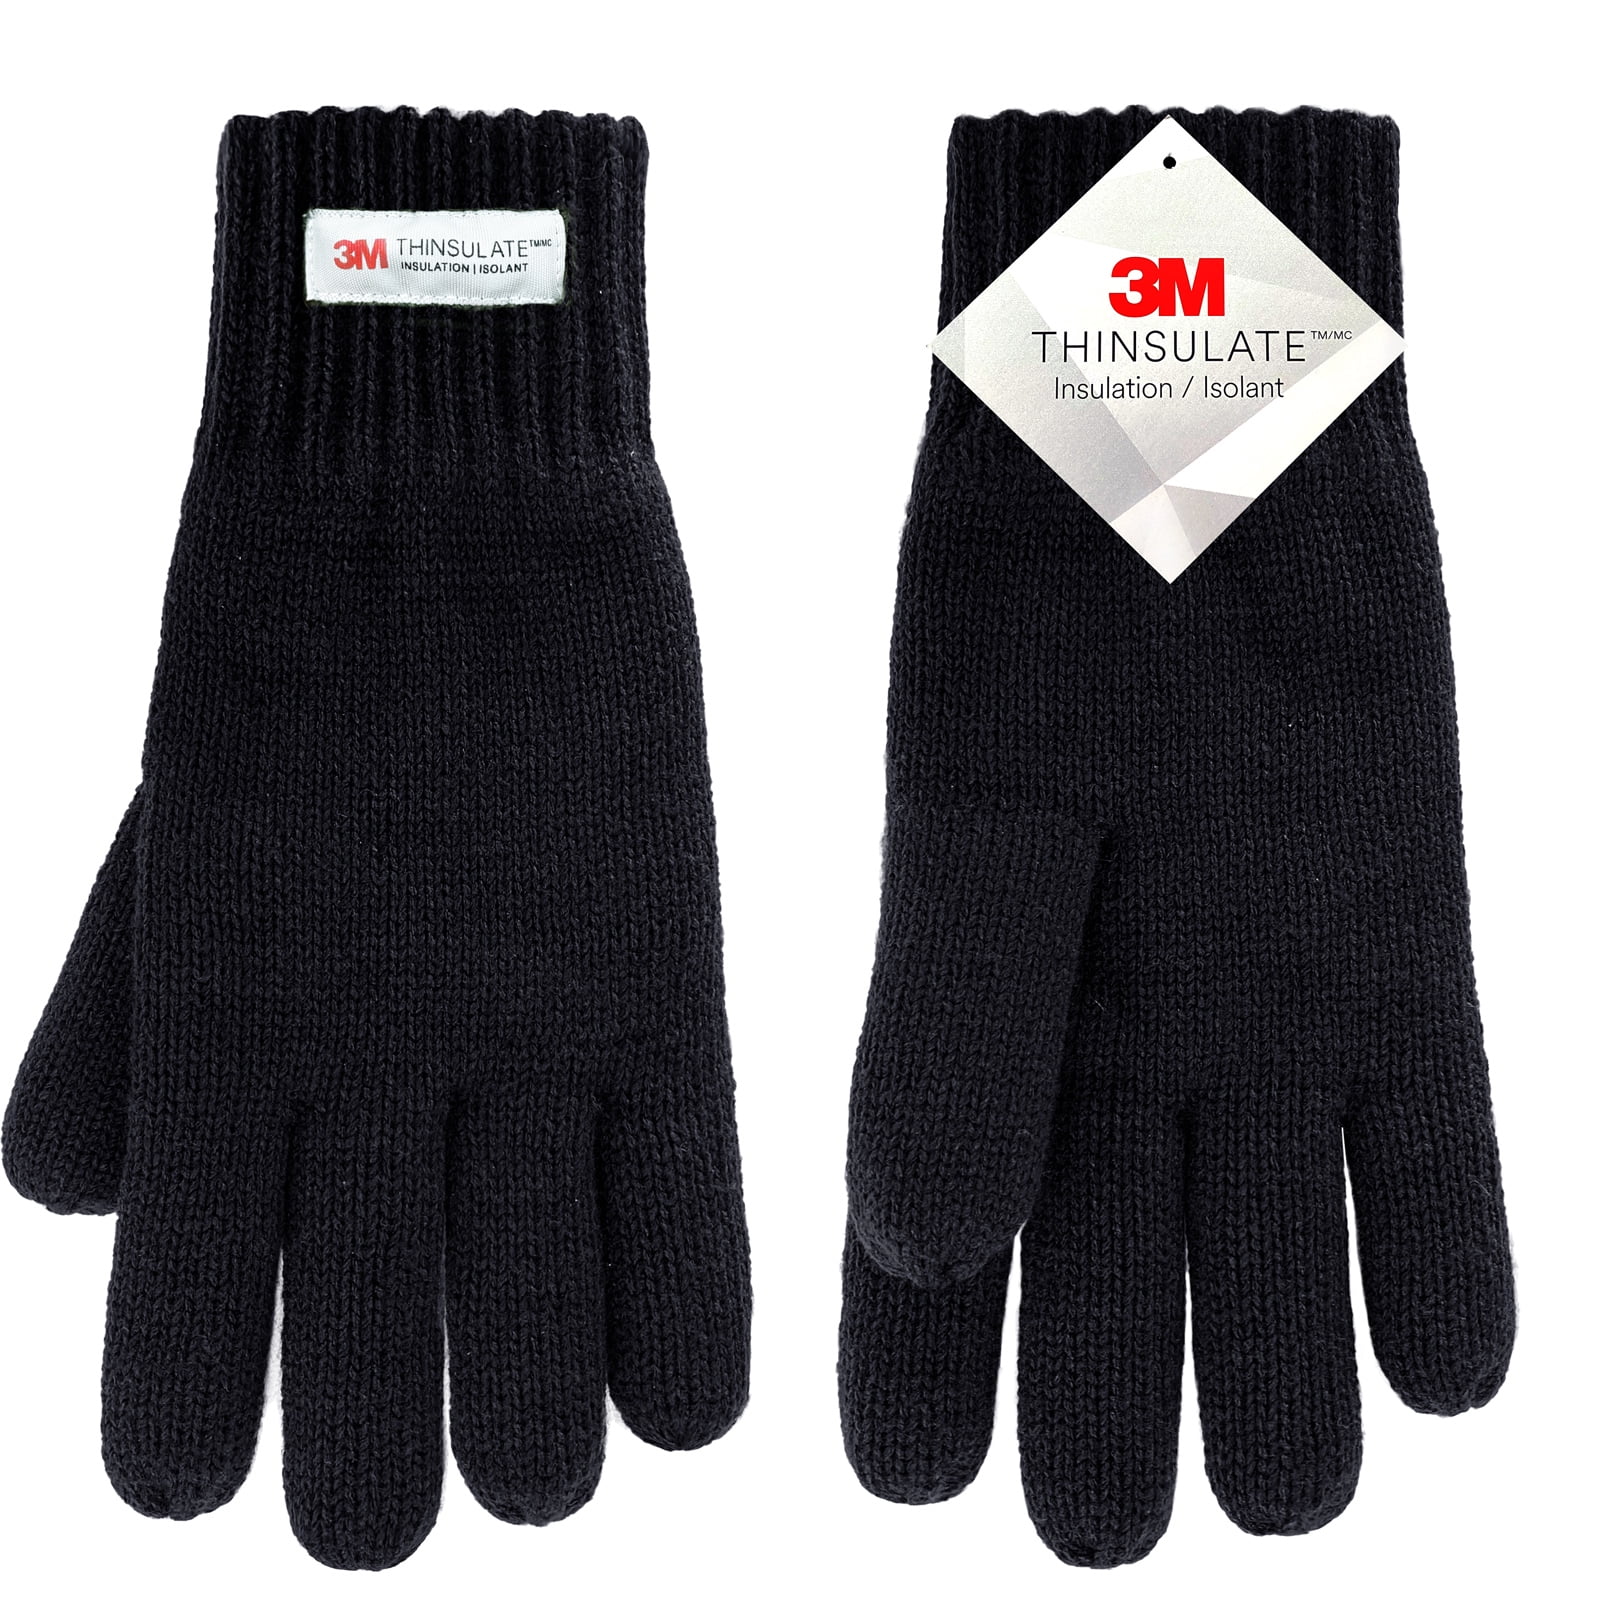 LADIES 3M BLACK THINSULATE THERMAL LINED WINTER GLOVES SMALL/MED 